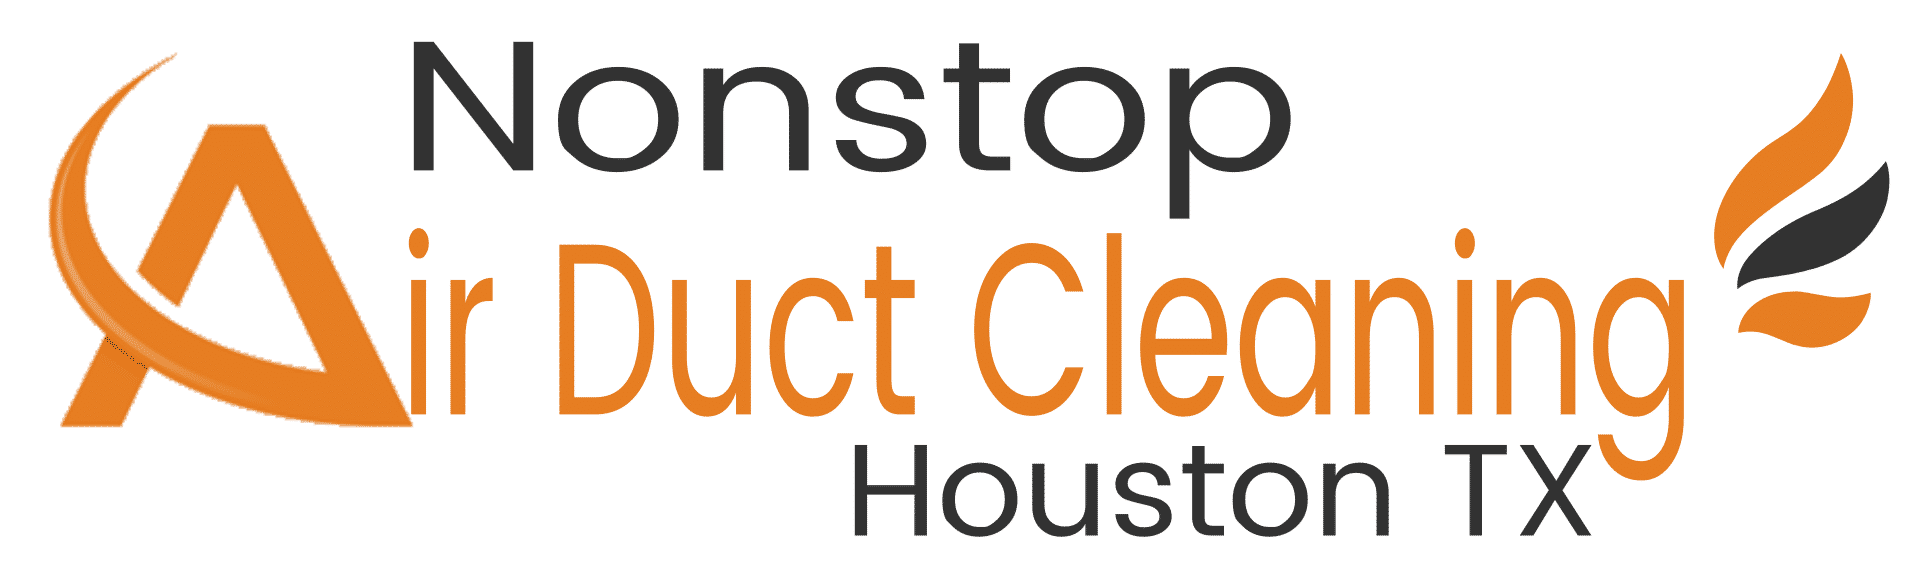 Nonstop Air Duct Cleaning Houston Logo.png